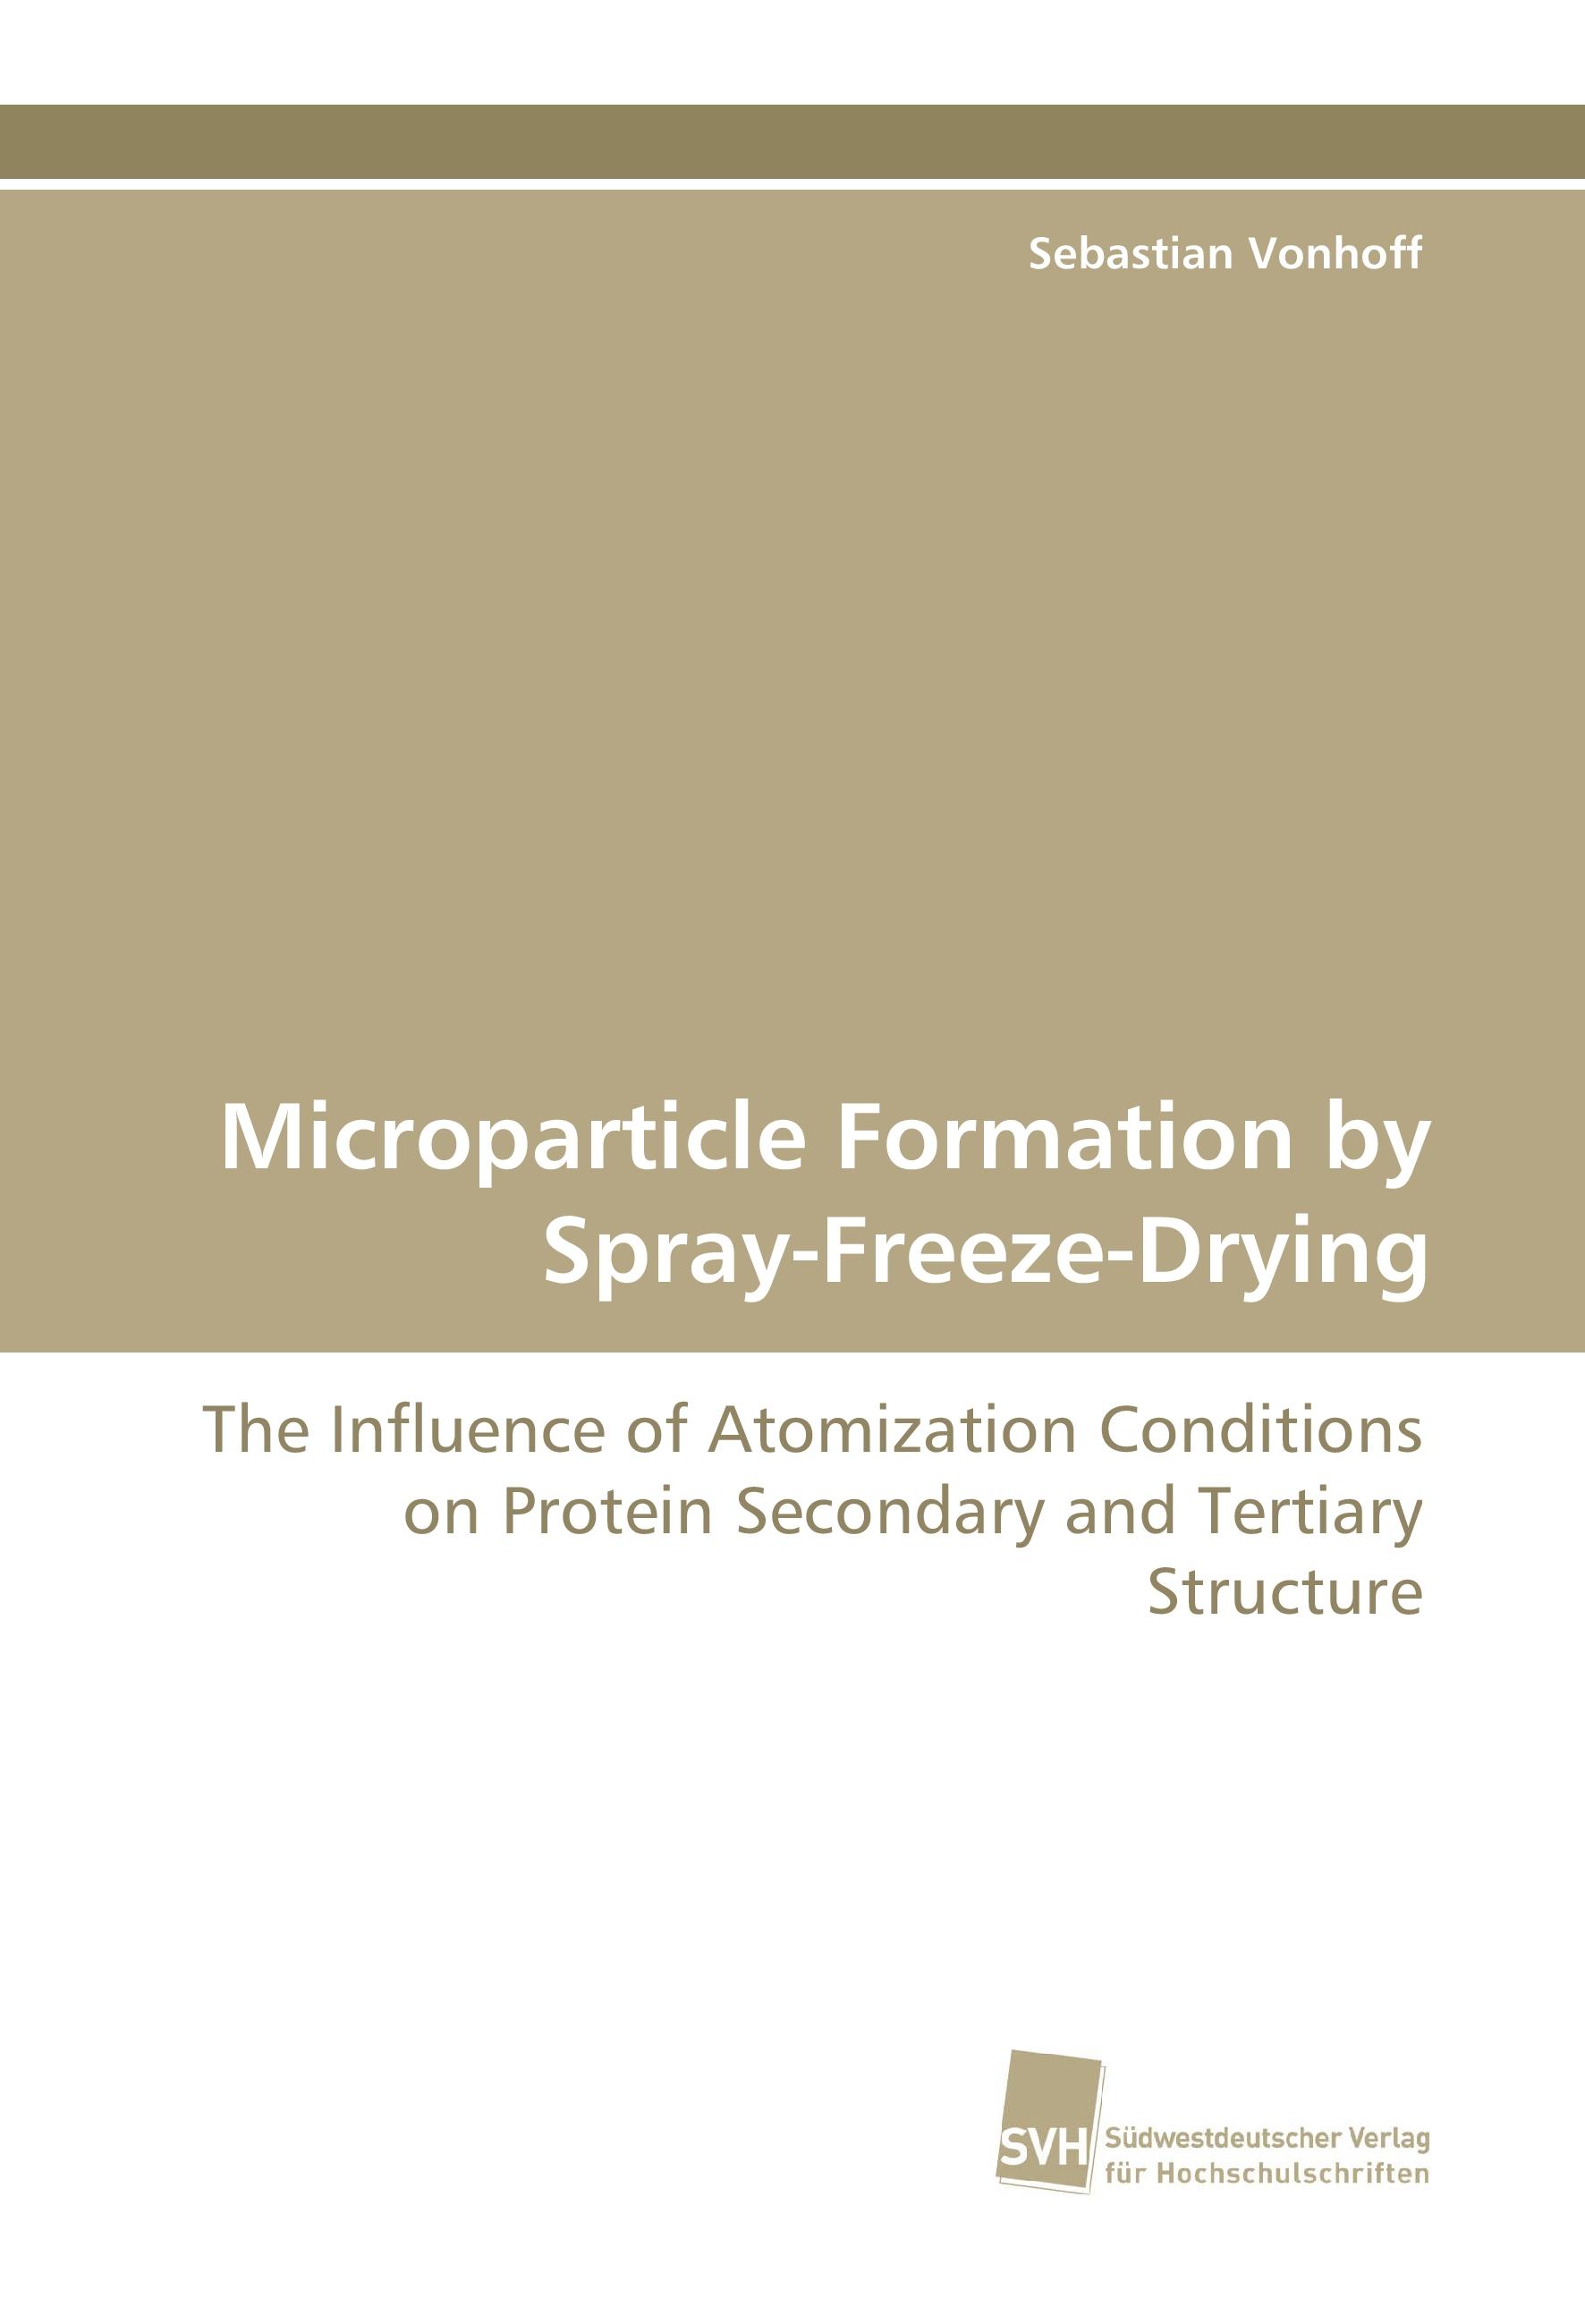 Microparticle Formation by Spray-Freeze-Drying / The Influence of Atomization Conditions on Protein Secondary and Tertiary Structure / Sebastian Vonhoff / Taschenbuch / Paperback / 188 S. / Englisch - Vonhoff, Sebastian